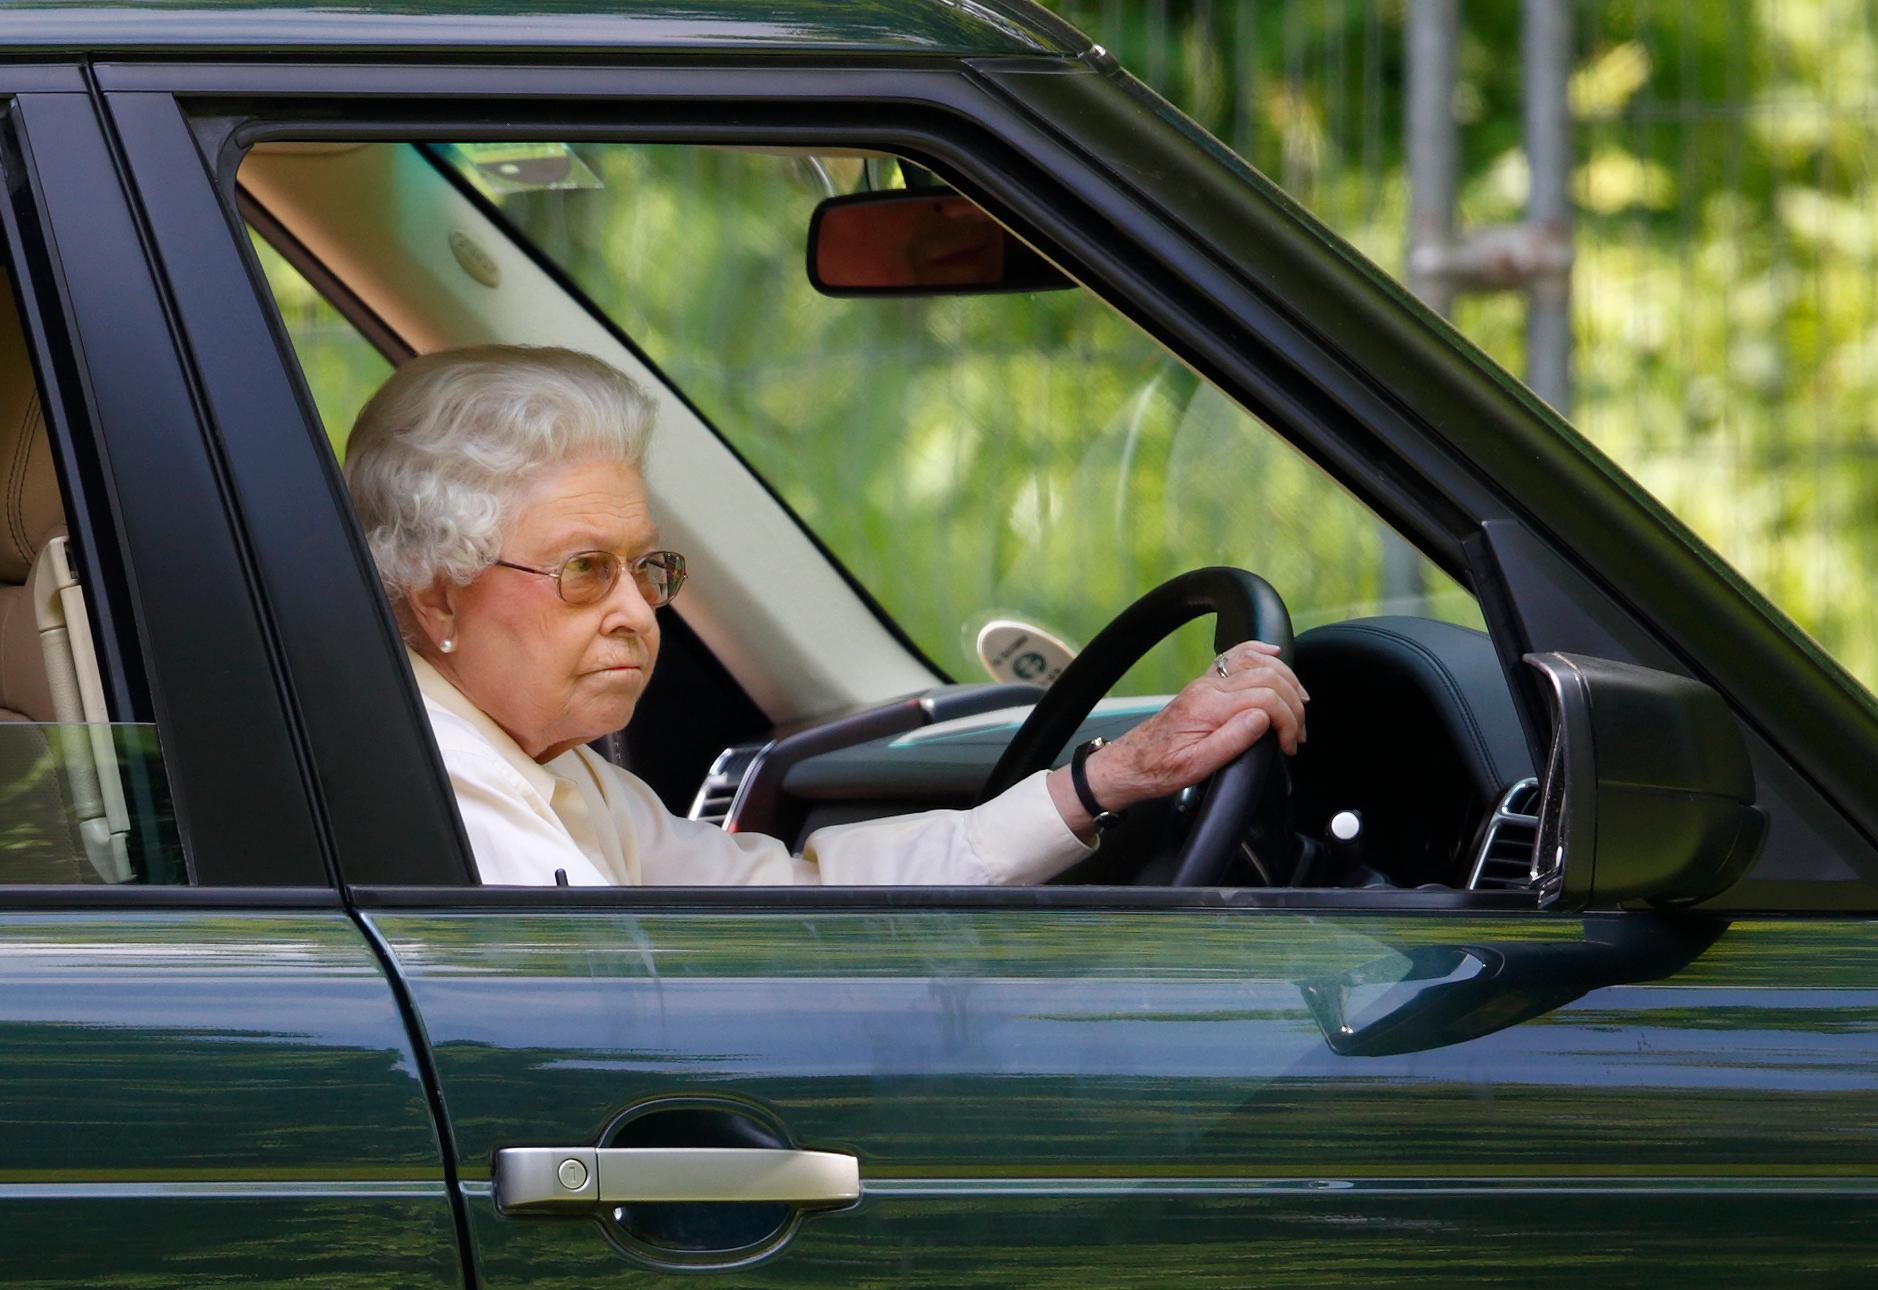 Apparently, Queen Elizabeth Is Picky About Who Rides In Her Car